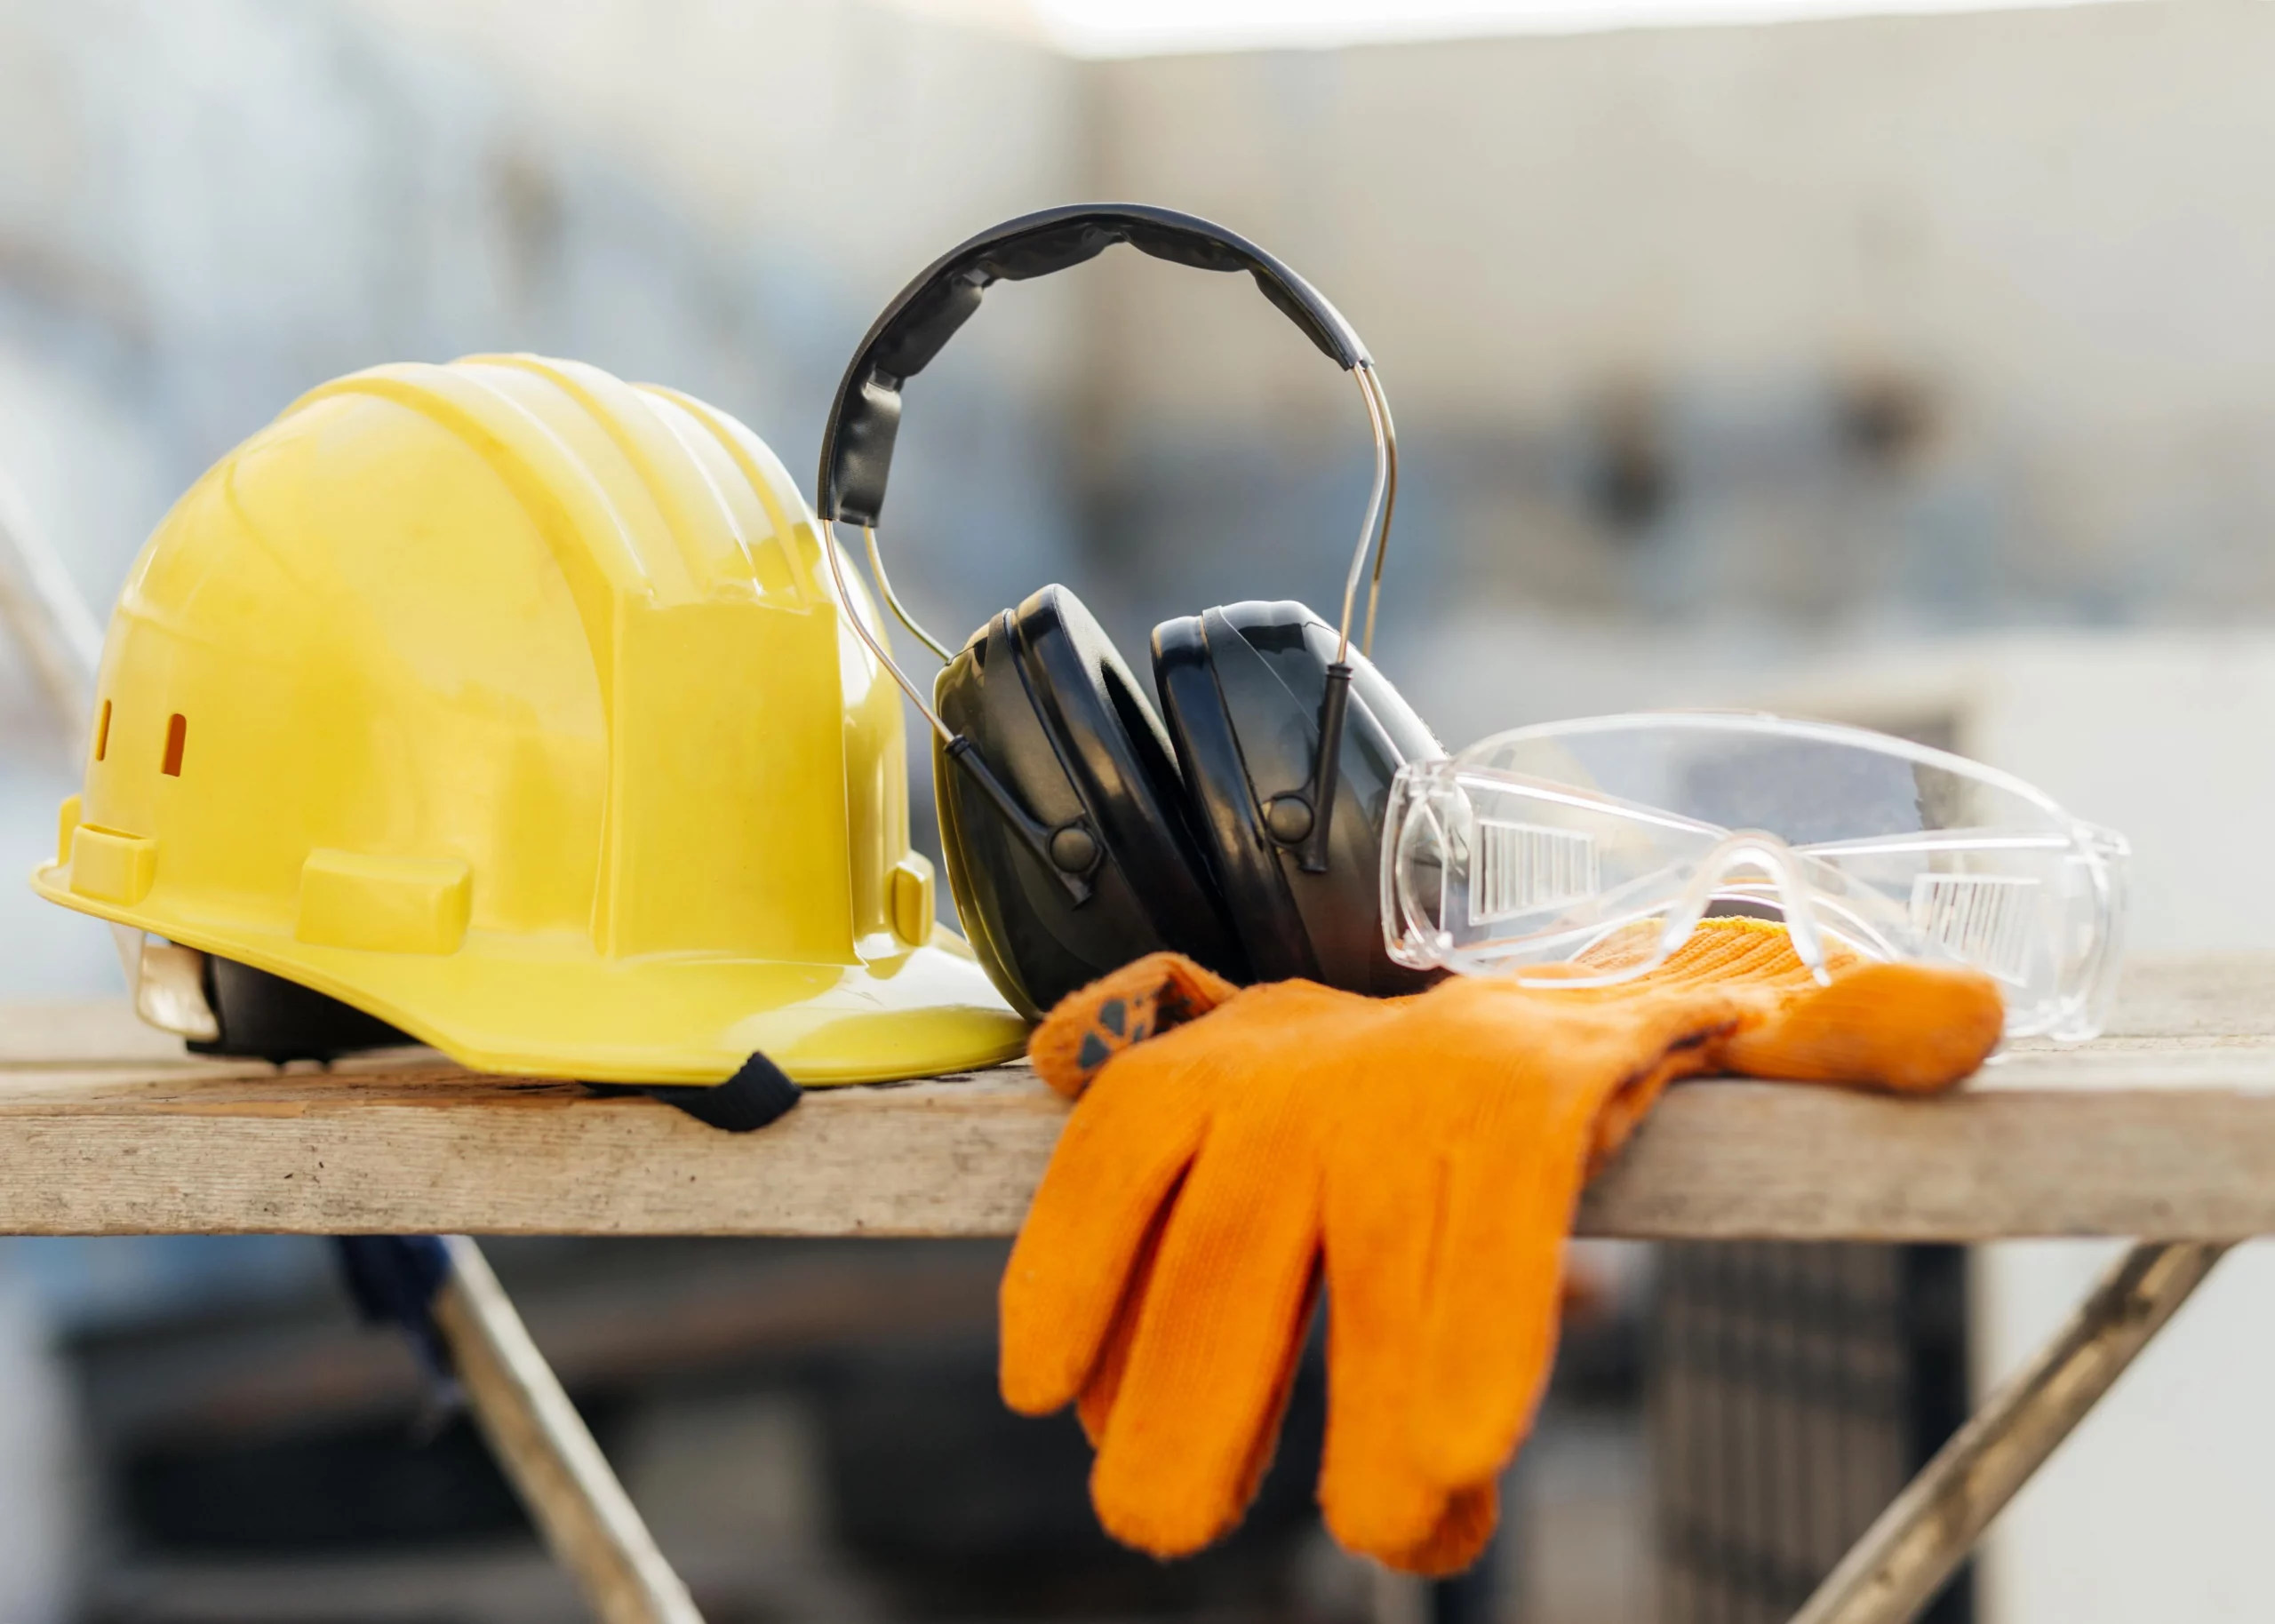 front-view-protective-glasses-with-hard-hat-headphones-scaled Noticias